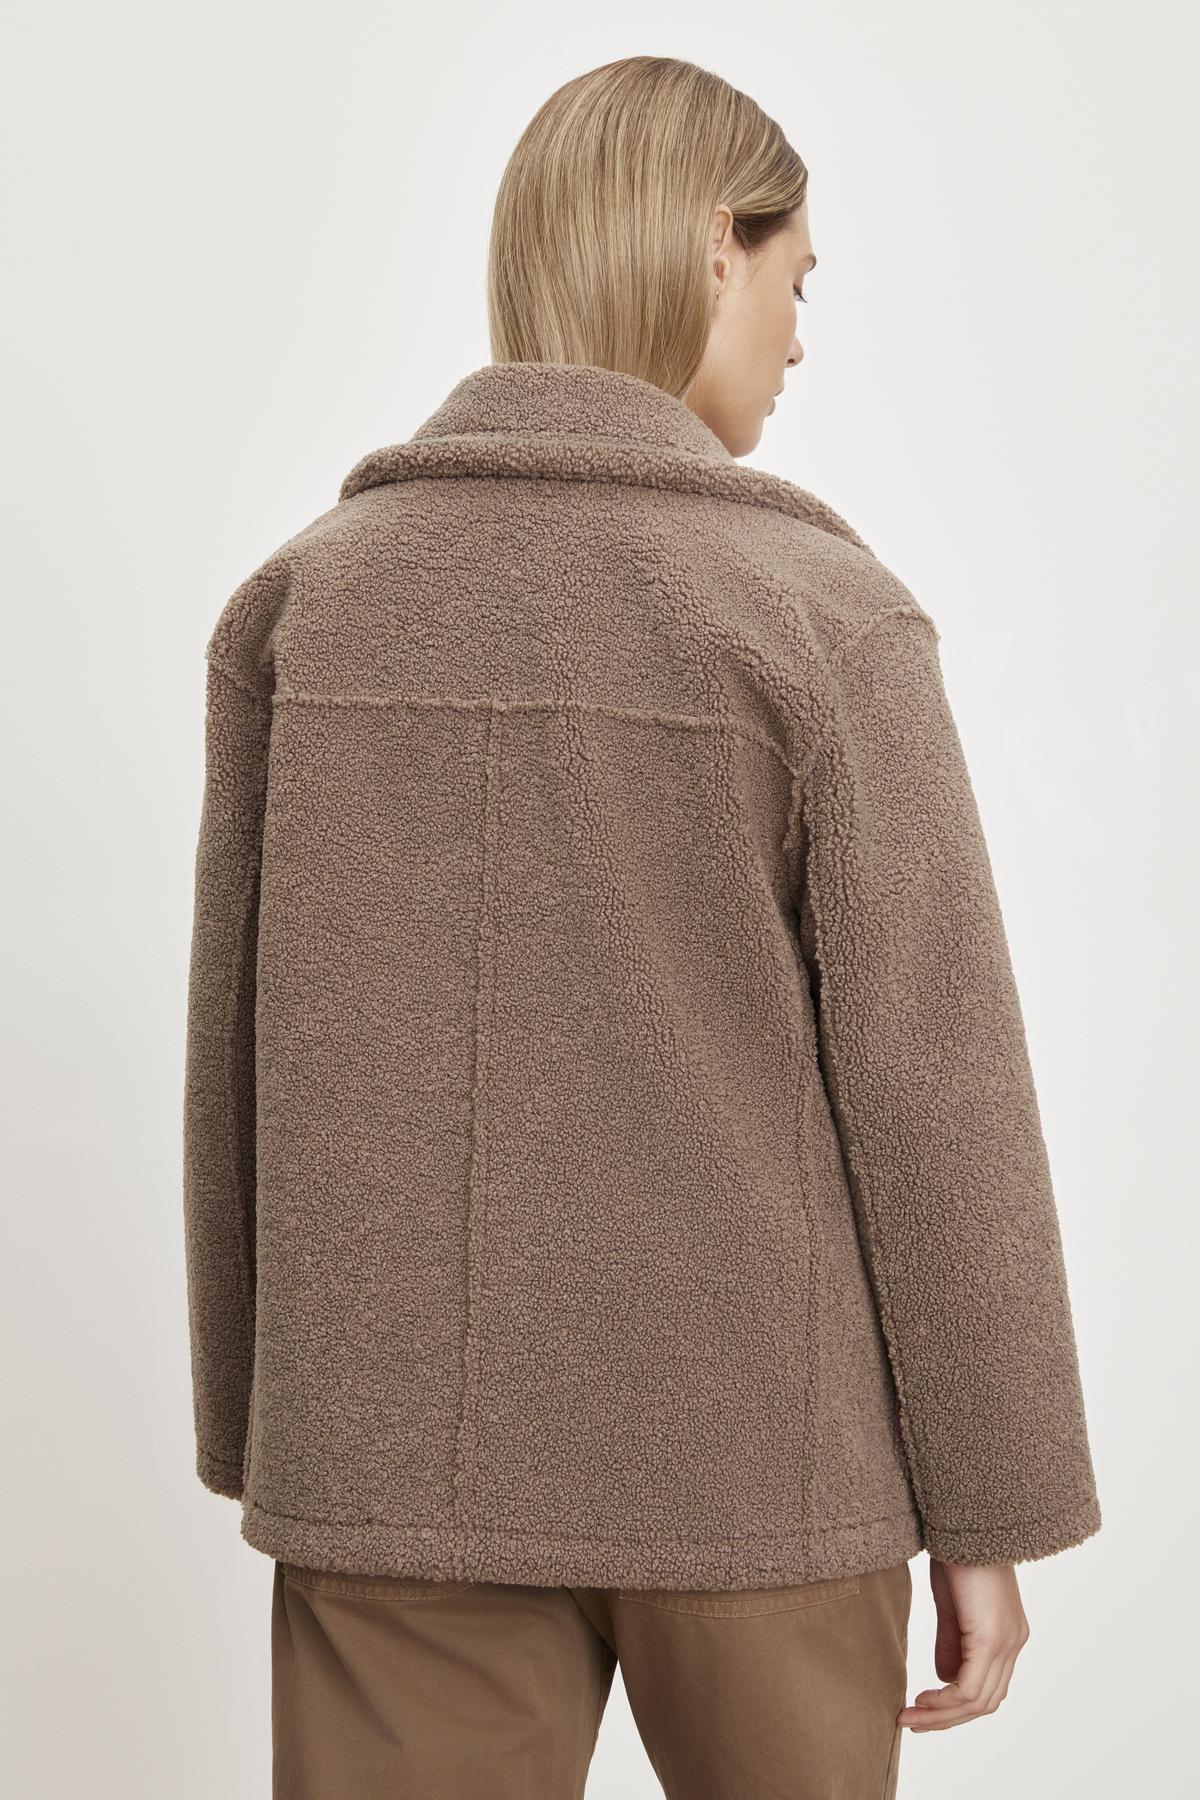   The back view of a woman wearing the YOKO LUX SHERPA OVERSIZED JACKET by Velvet by Graham & Spencer. 